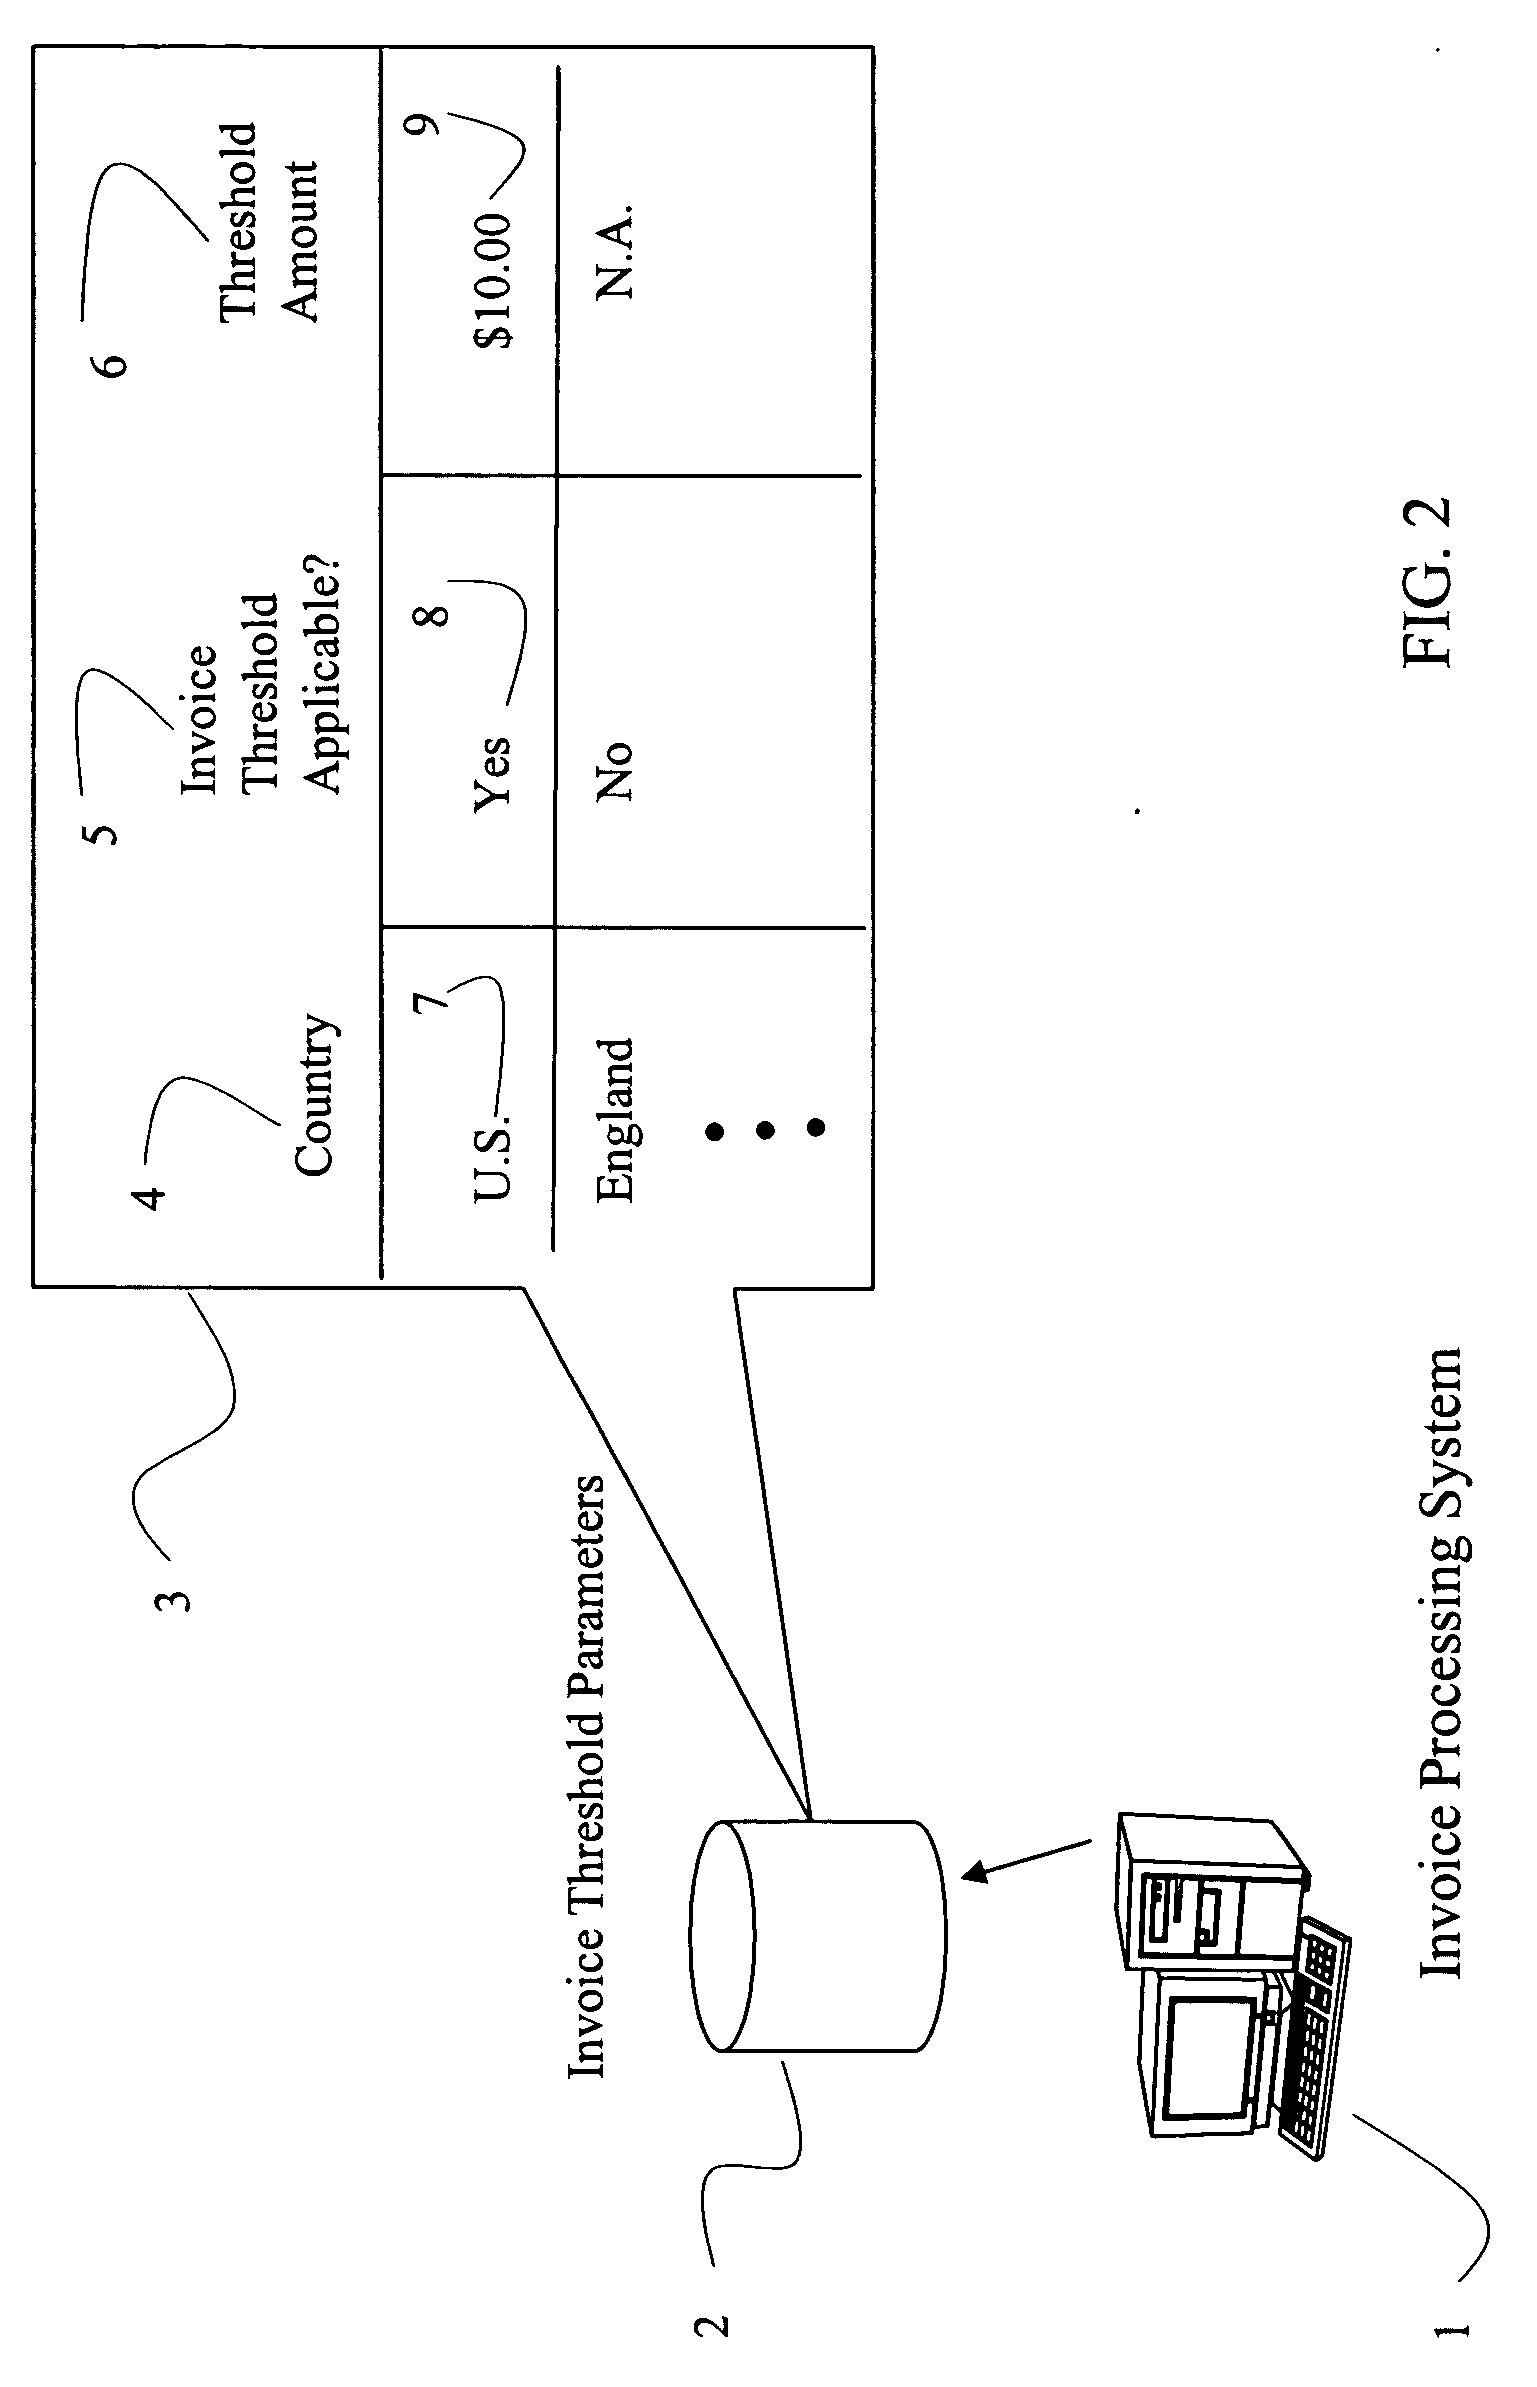 Systems and methods for processing invoices based on a minimum invoice amount